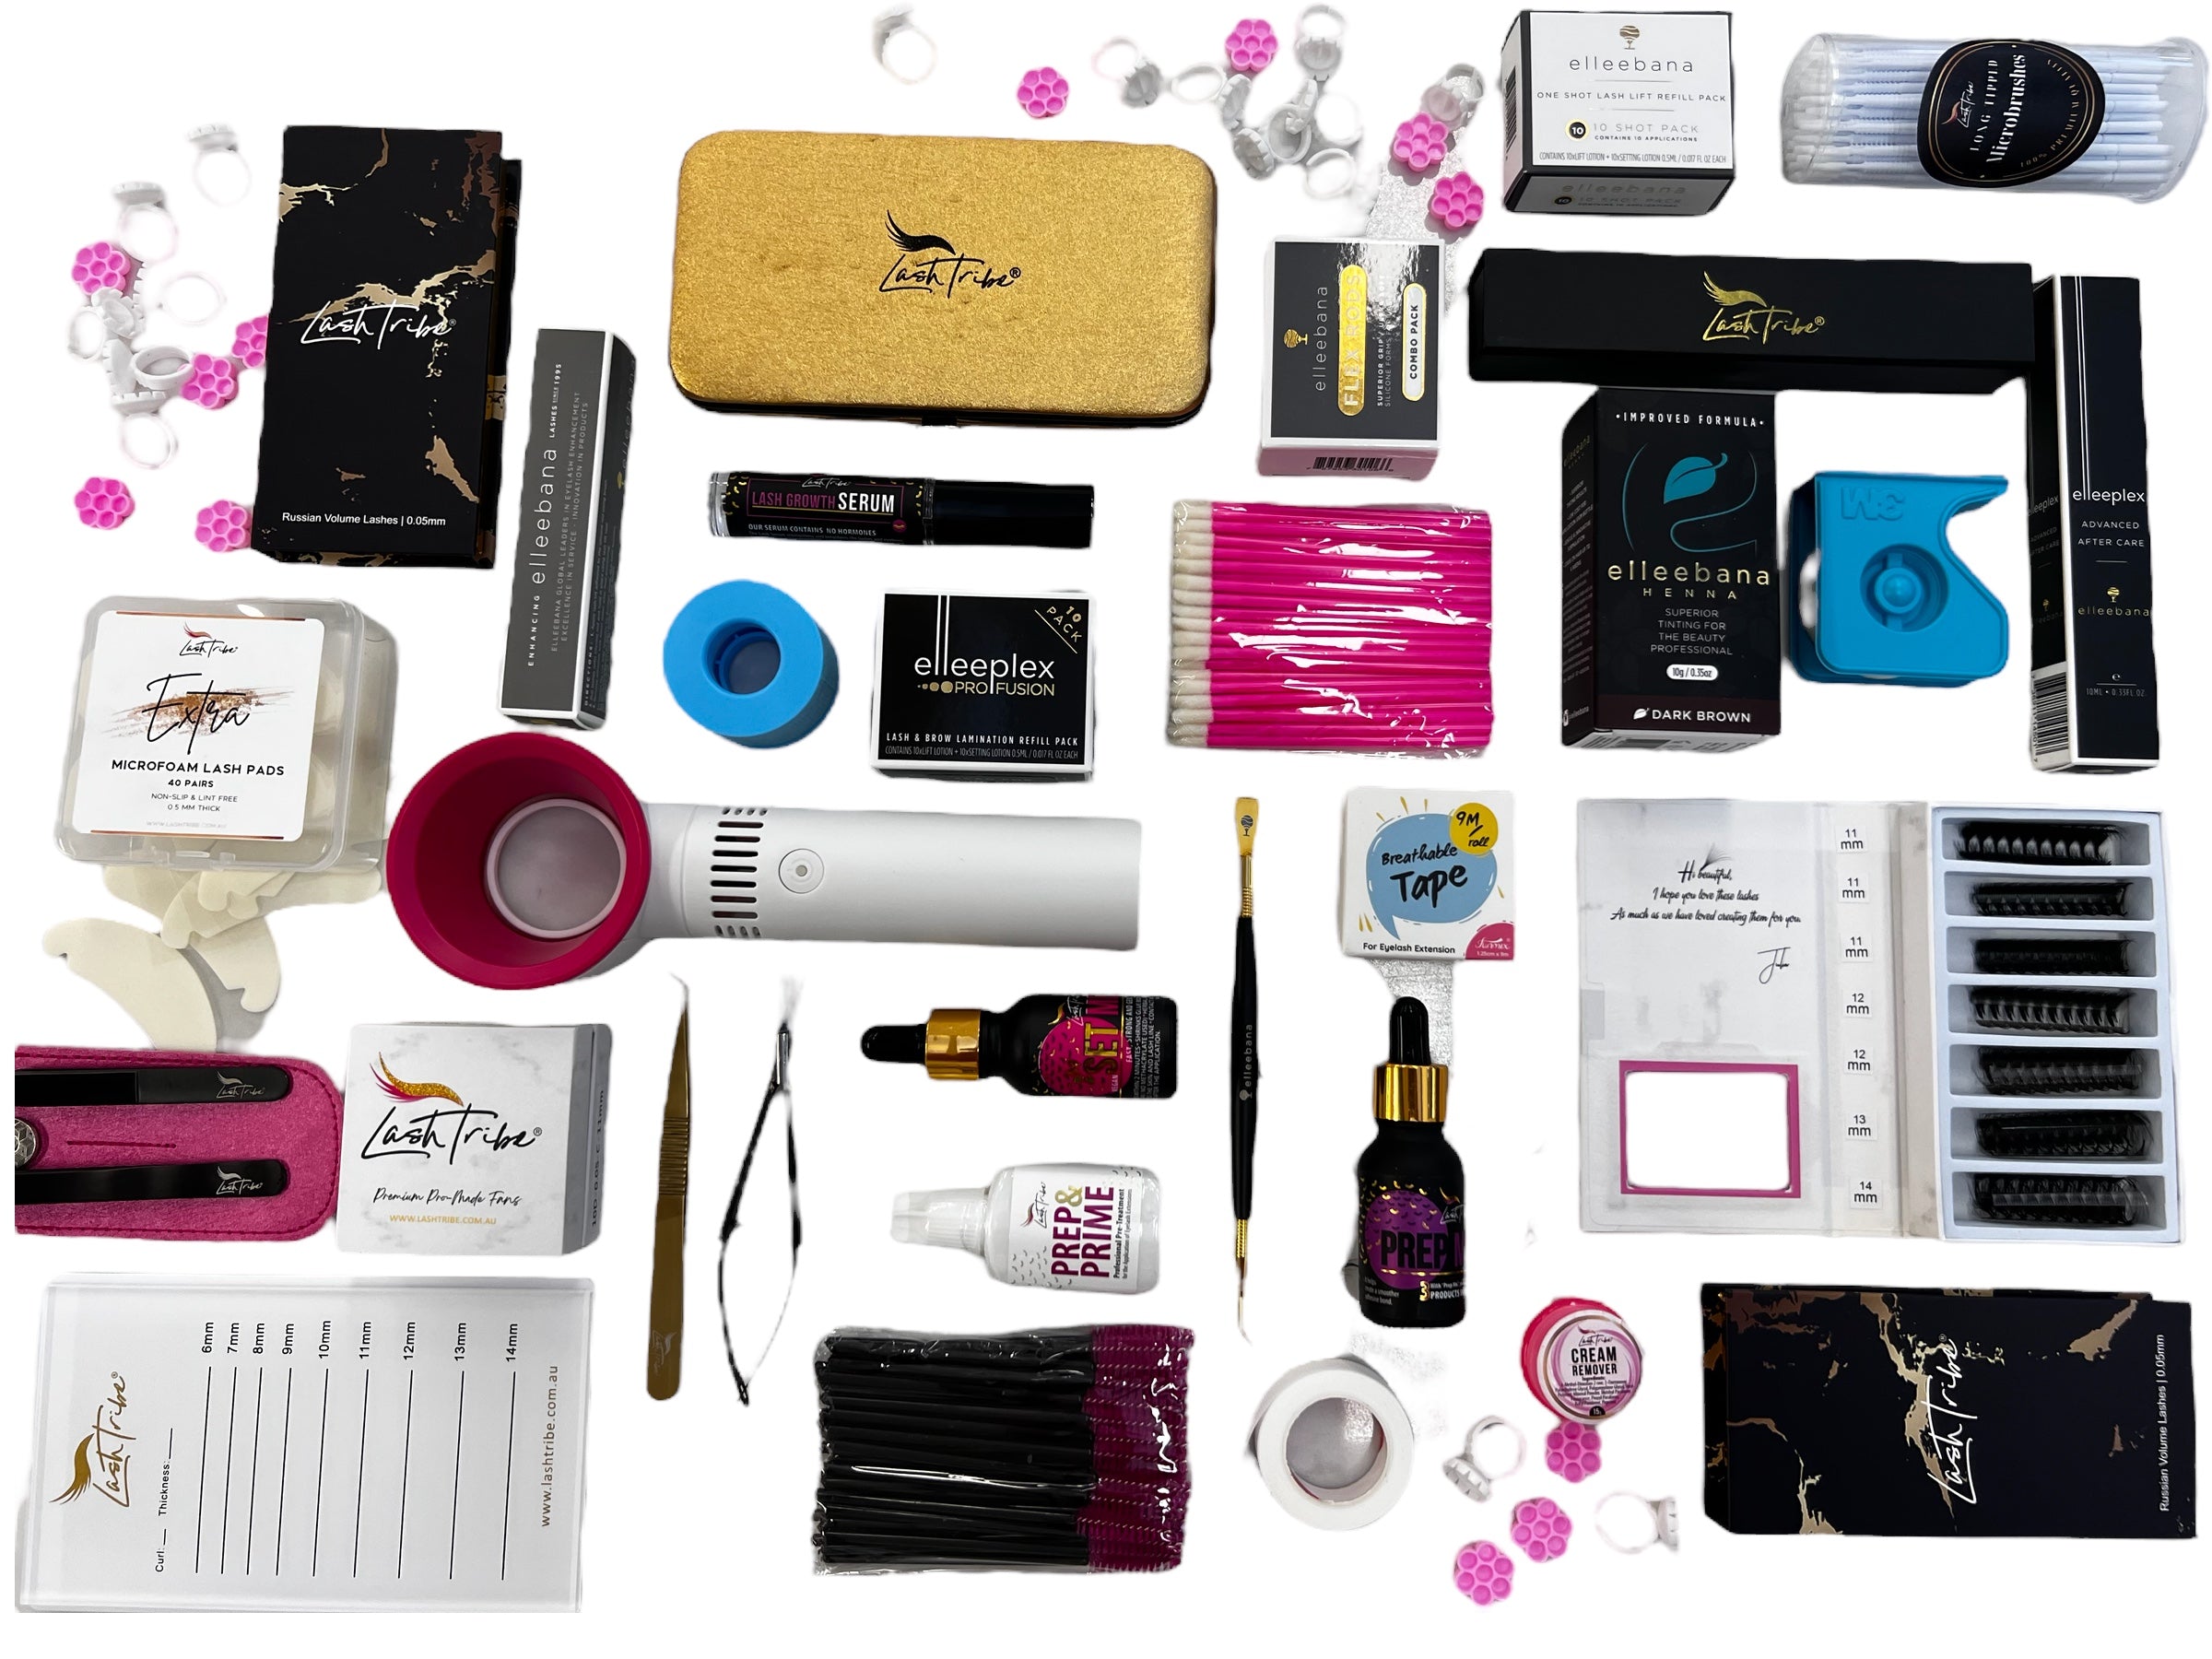 A collection of cosmetics and other items on a white background.